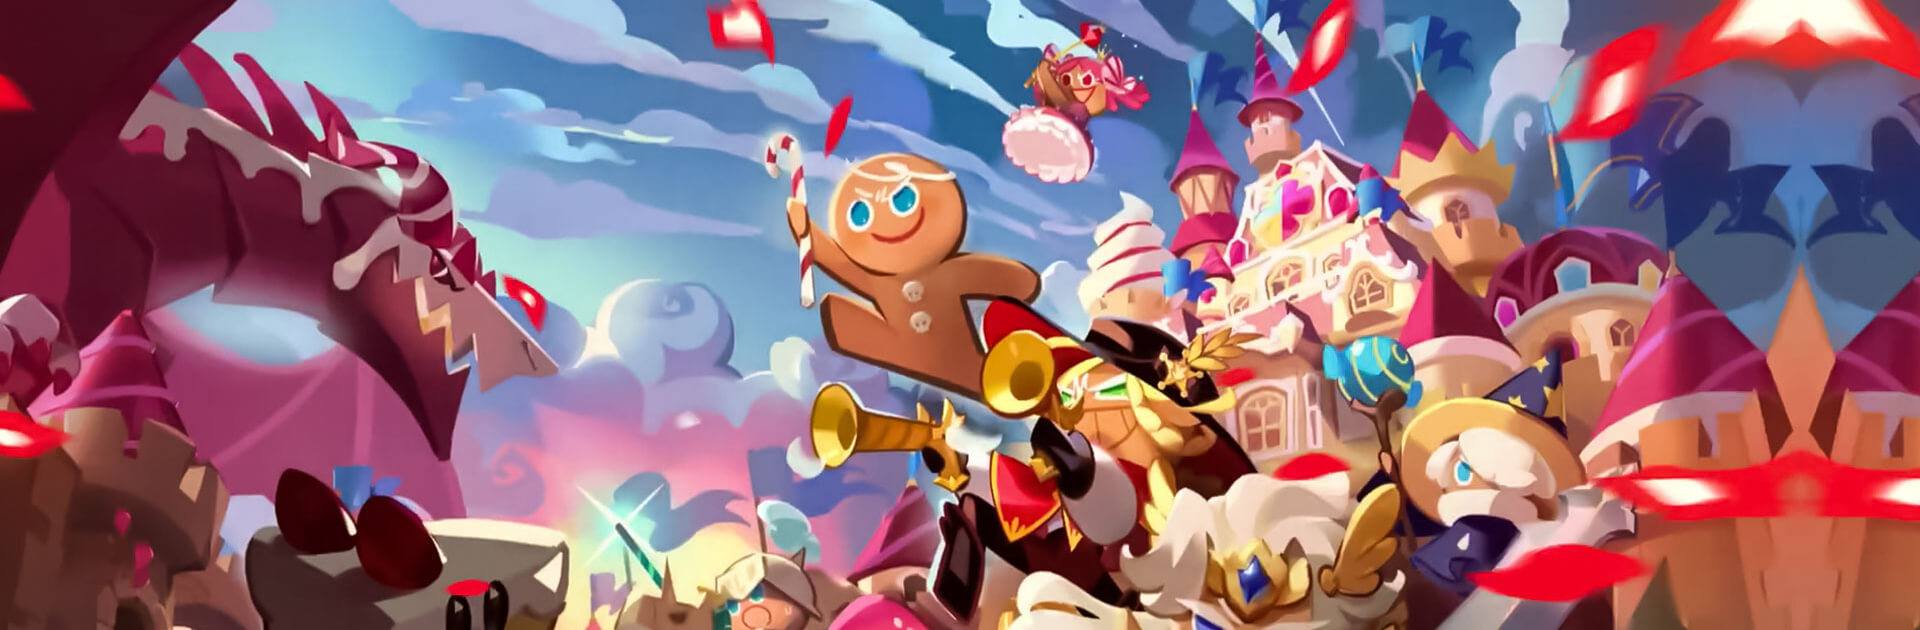 Play Cookie Run: Kingdom Online for Free on PC & Mobile